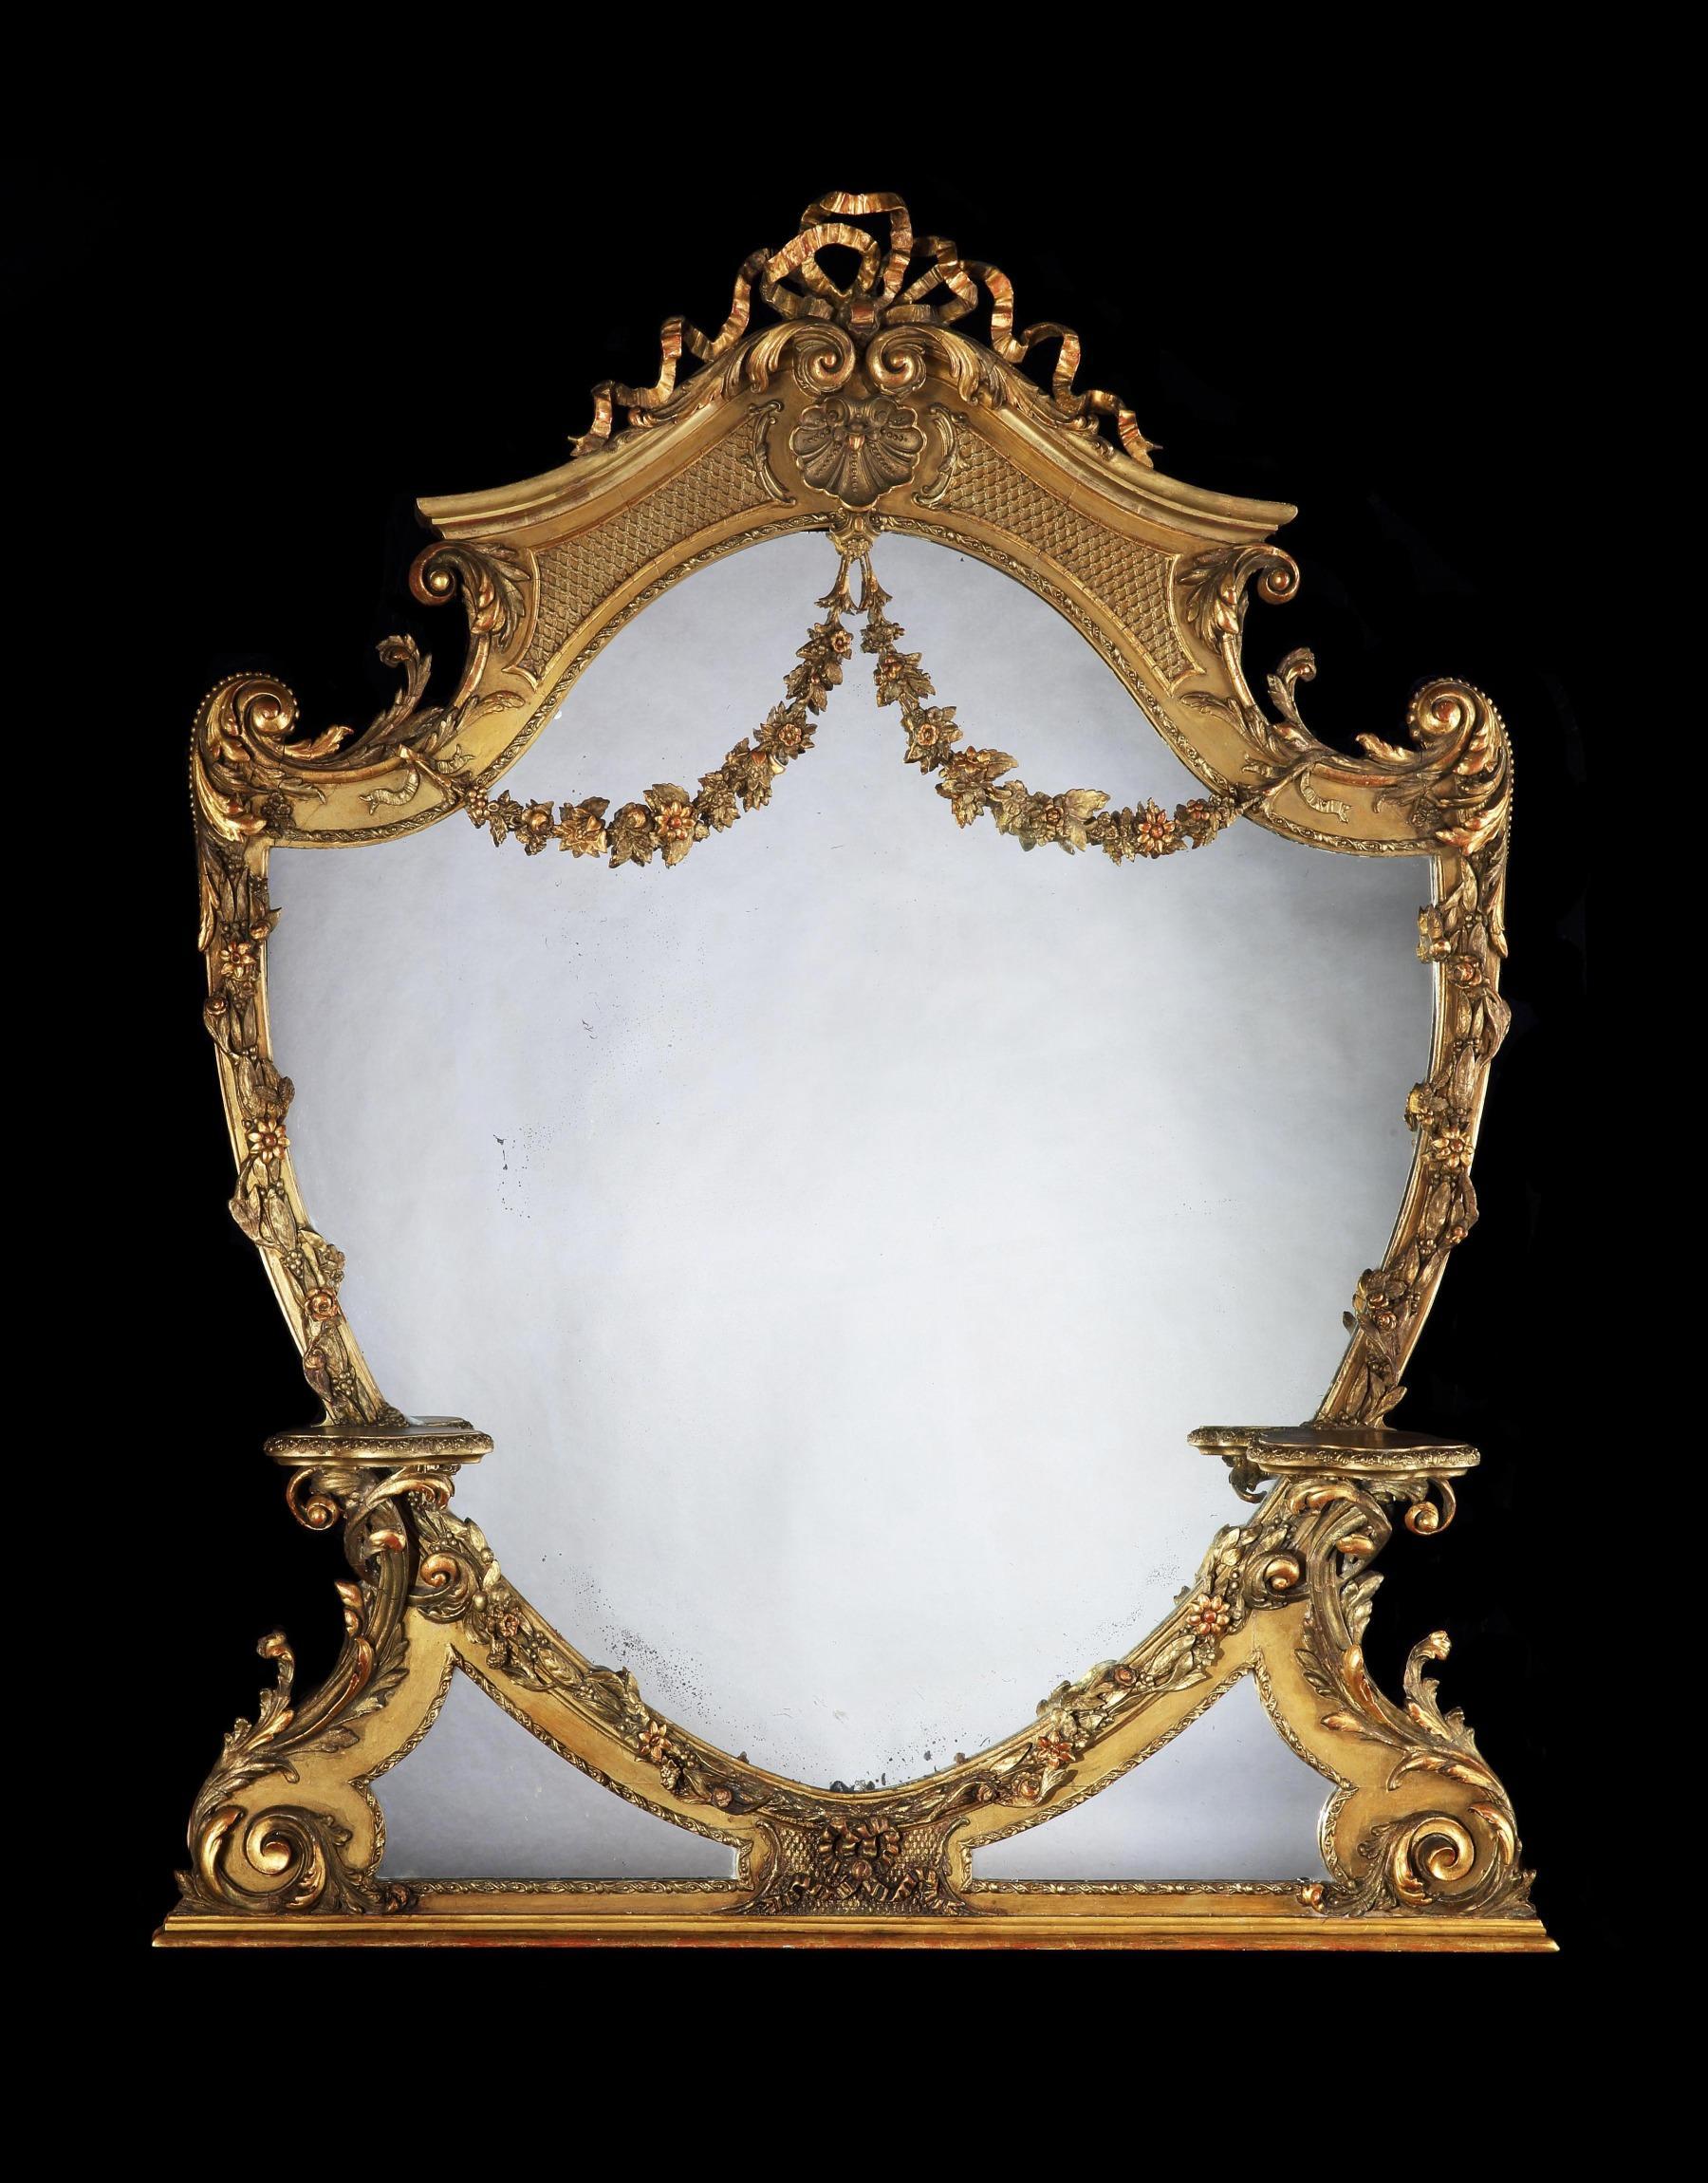 An unusual shield or cartouche shaped 19th century Victorian giltwood and gesso overmantel mirror of large proportions standing 6ft tall, English, circa 1880. Of neoclassical cartouche shaped form, the original mirror plate within a scroll, flower